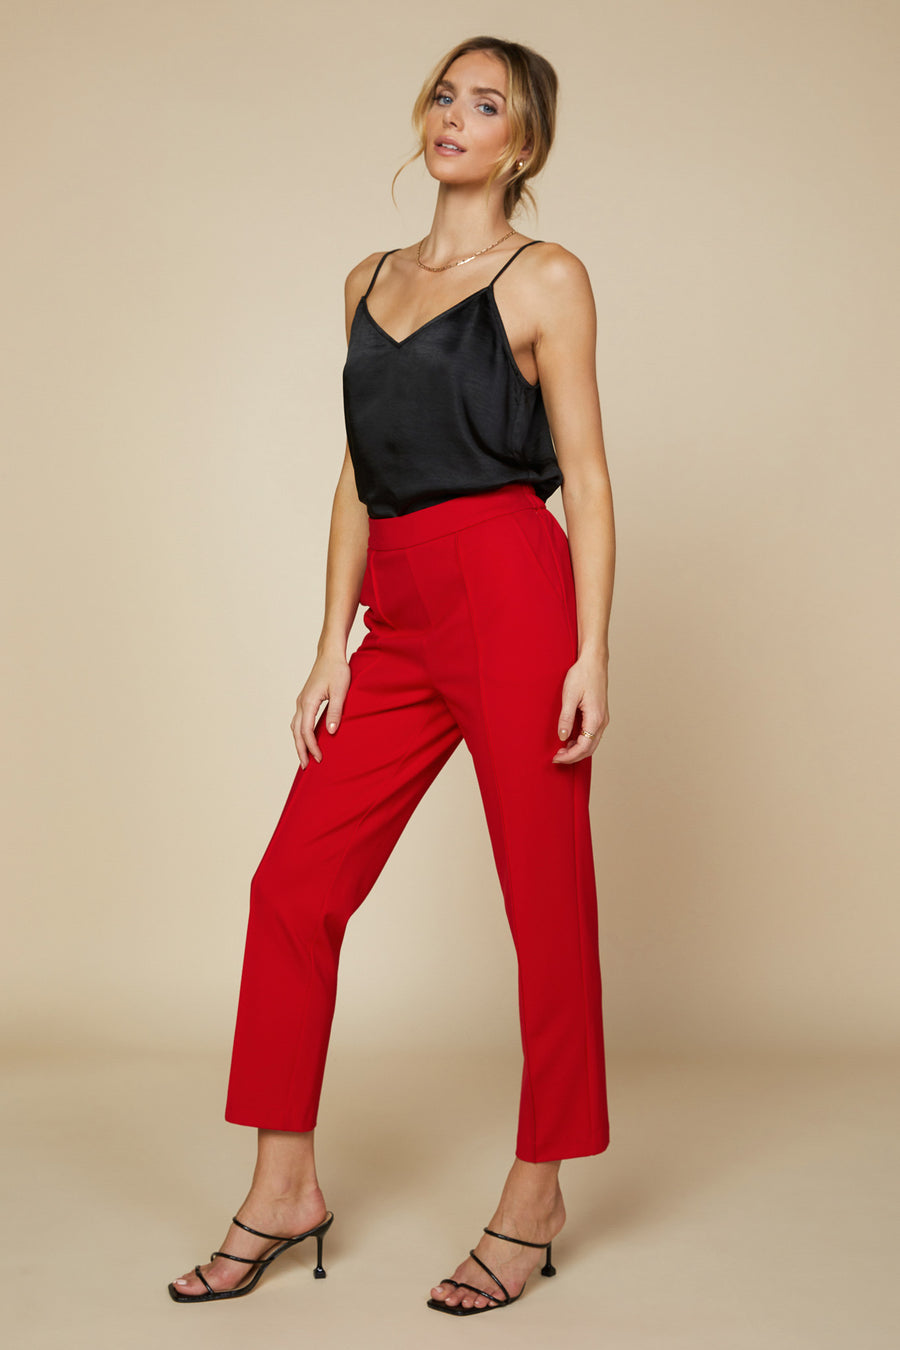 Skies are Blue Work Work Work Dress Pants - Scarlet Red, tapered leg, pull on, from pockets, pin tuck detail, plus size